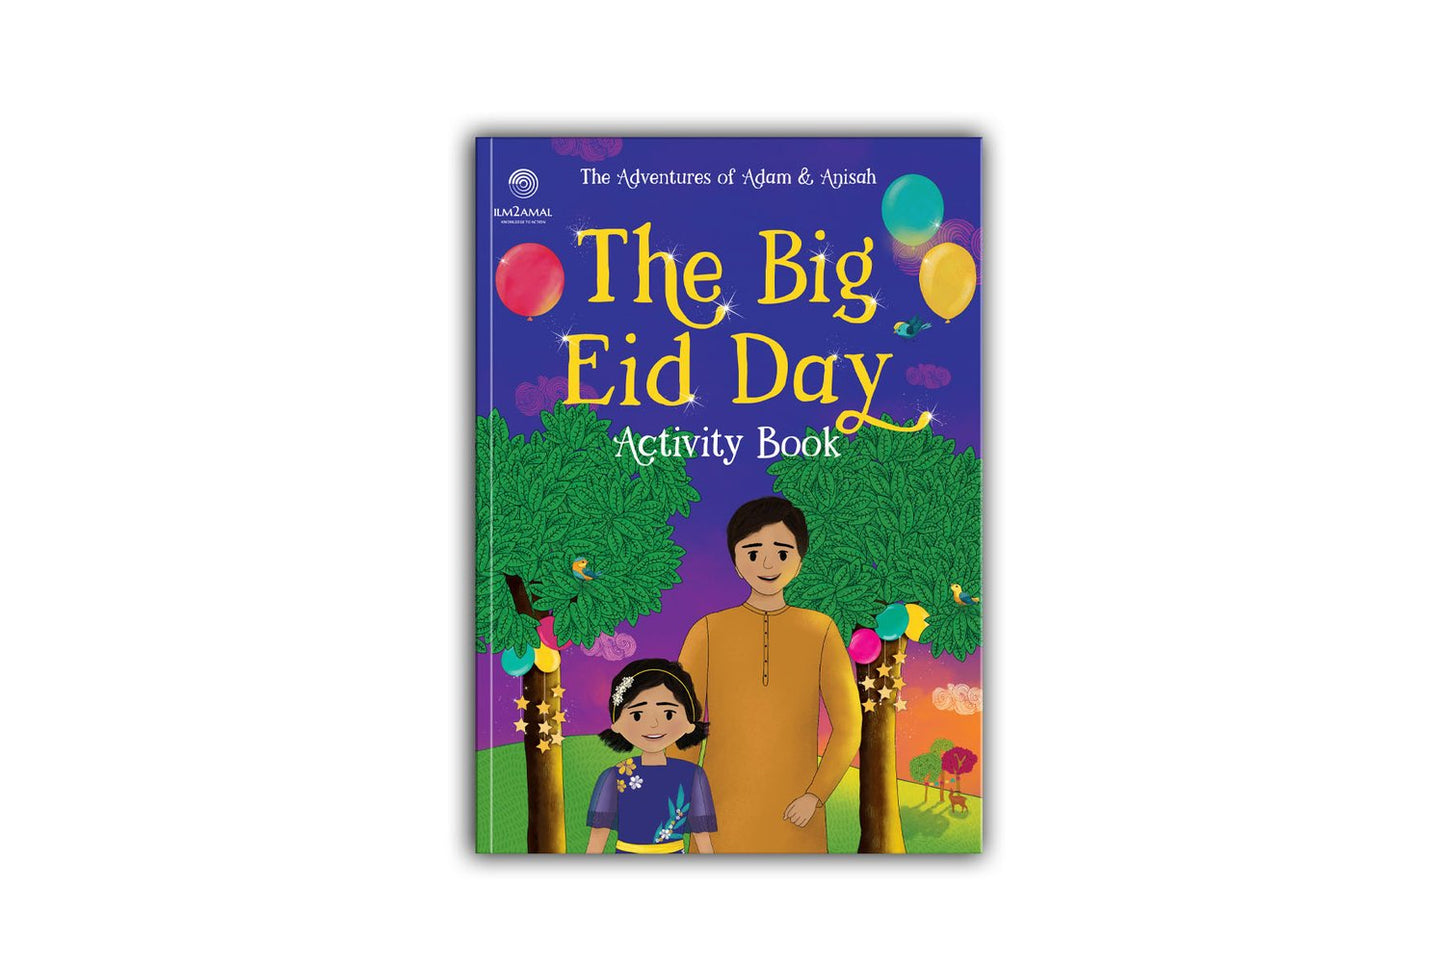 The Big Eid Day - Activity Book